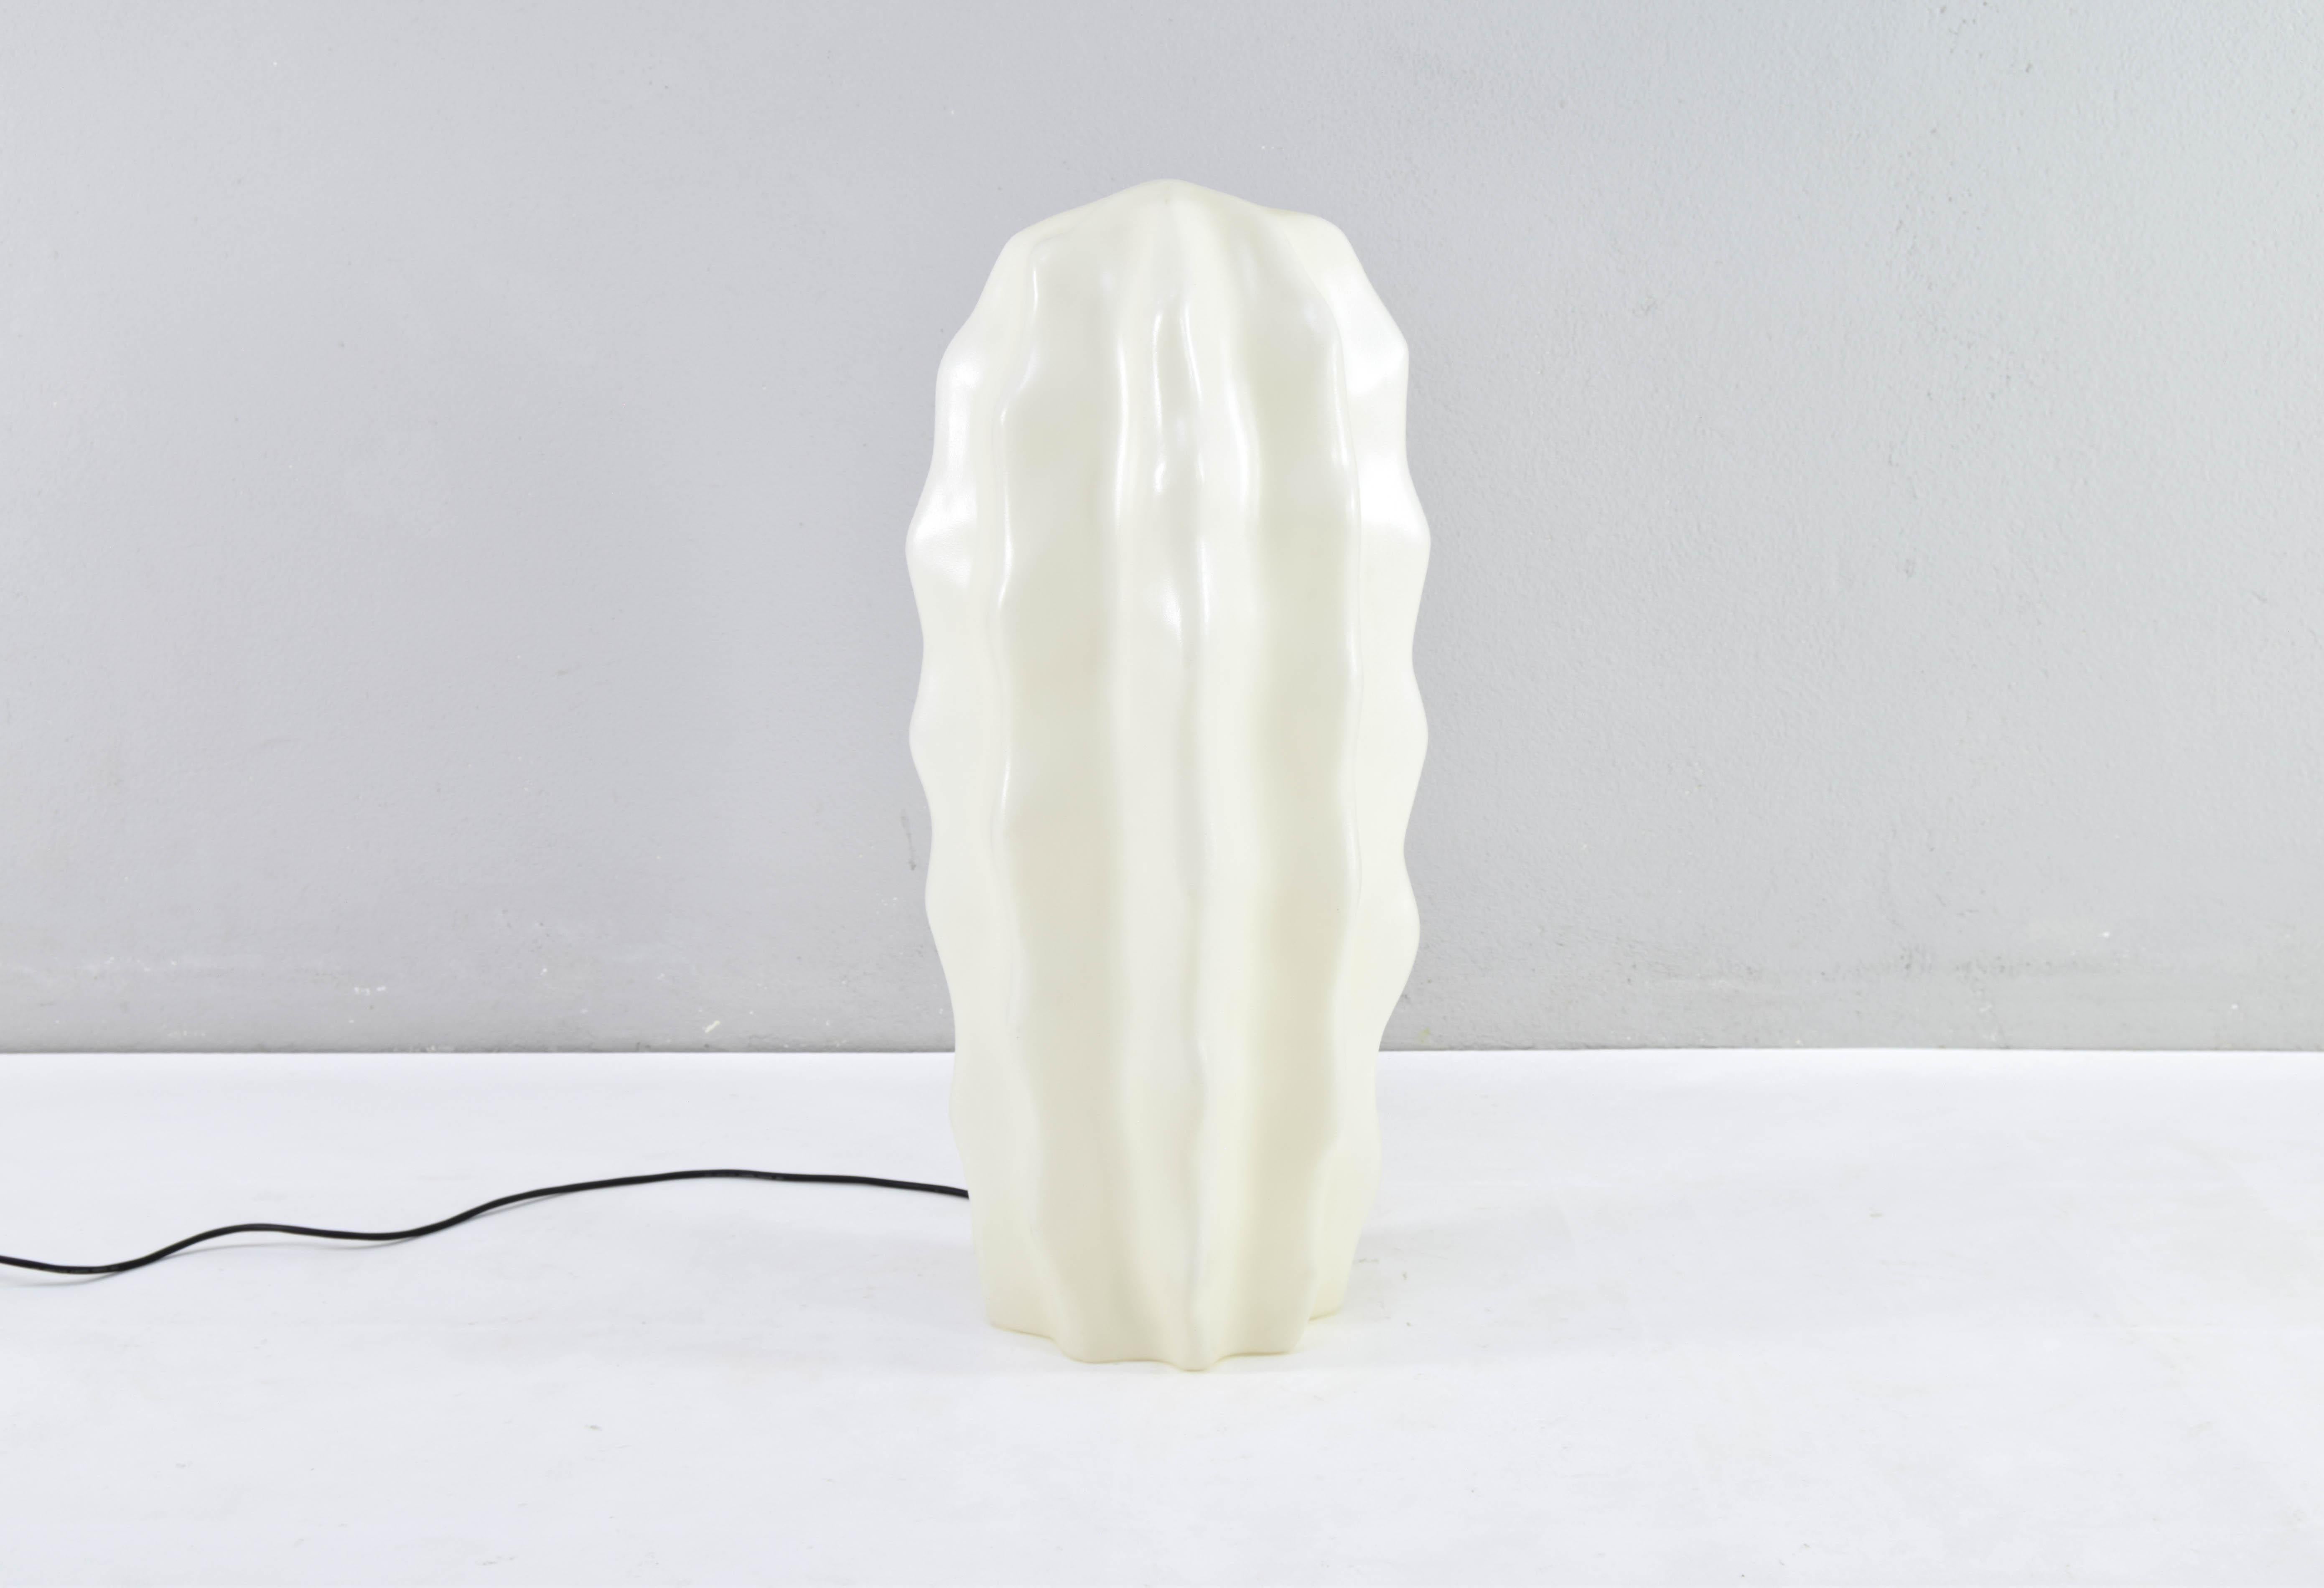 Cactus Sucu floor lamp designed in the 1980s by Art Nowo for Flötotto, Rietberg, Germany.
This spectacular piece made of rigid plastic in the shape of a Cactus emits a diffuse and warm light.

It is in very good condition, practically